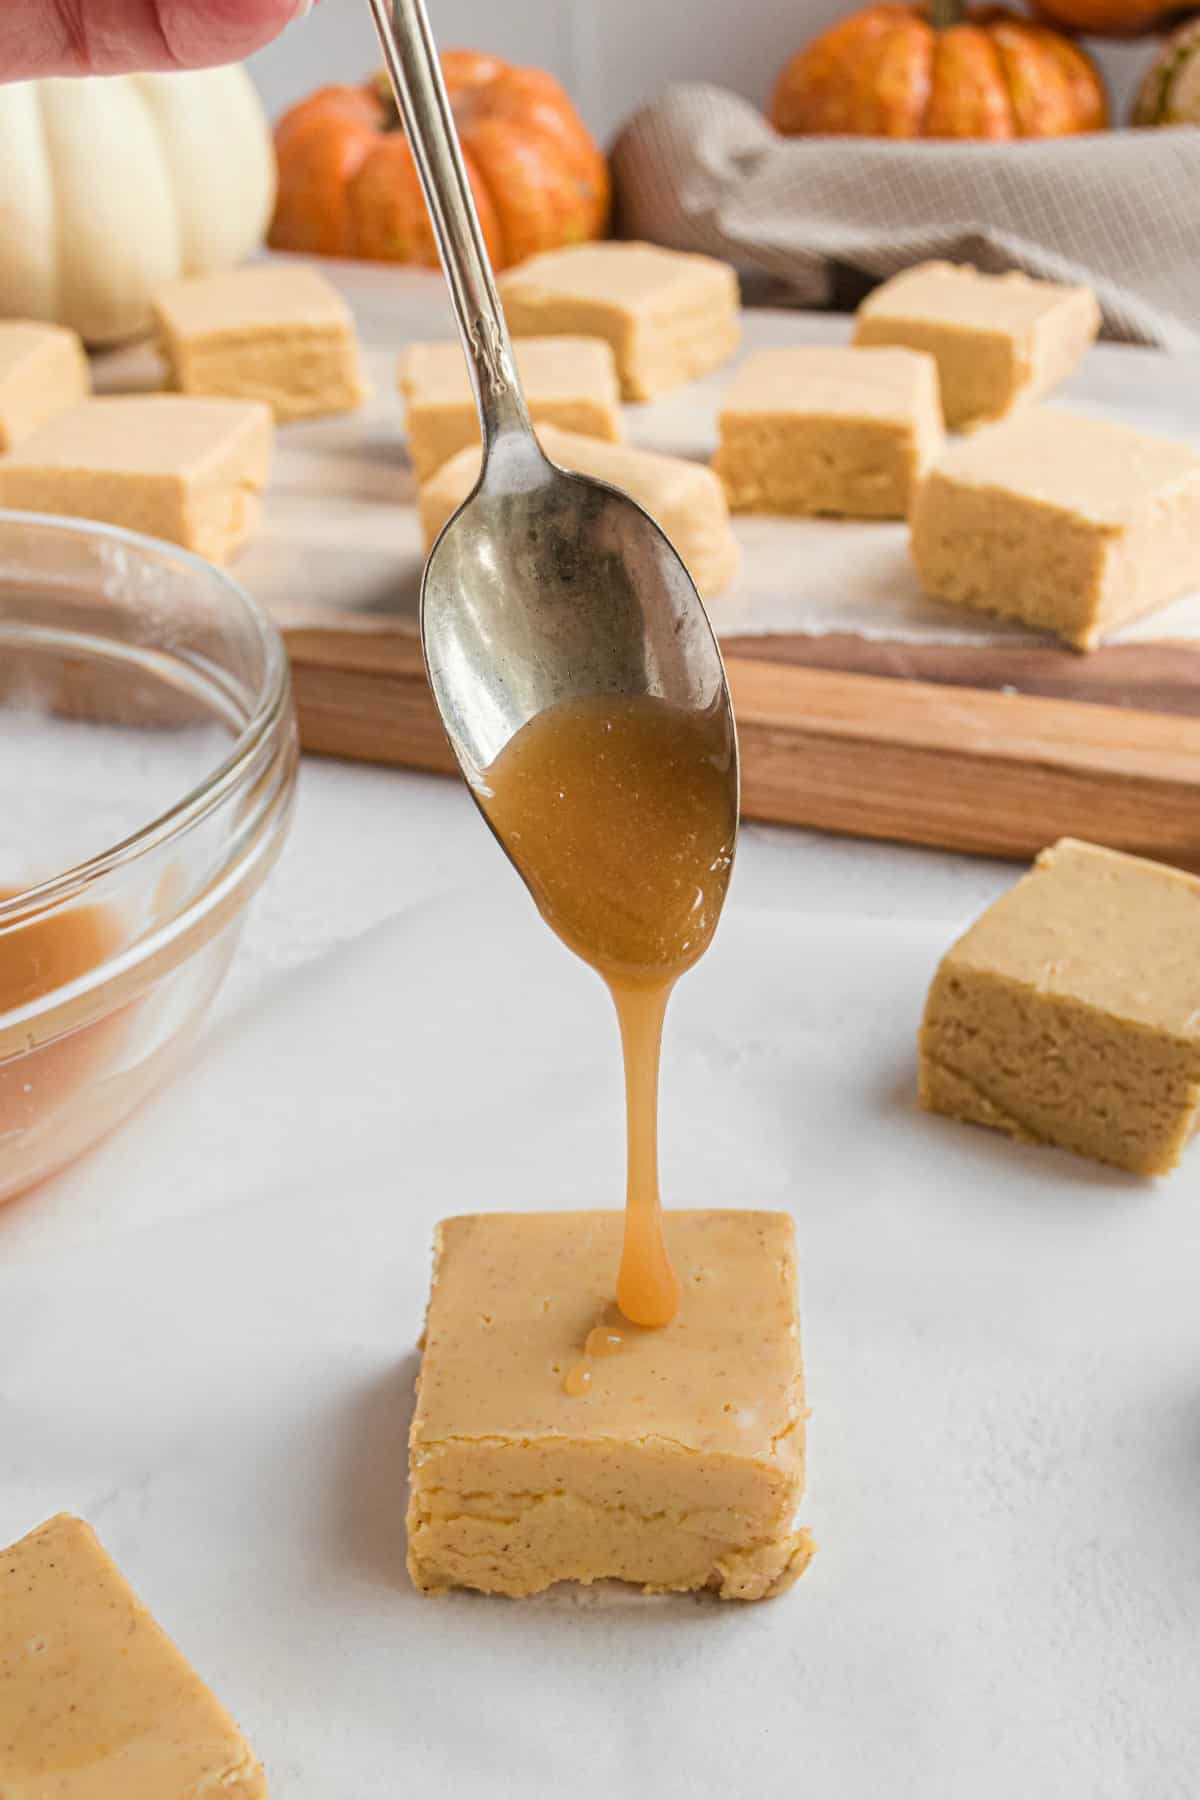 Caramel drizzled from spoon onto fudge.